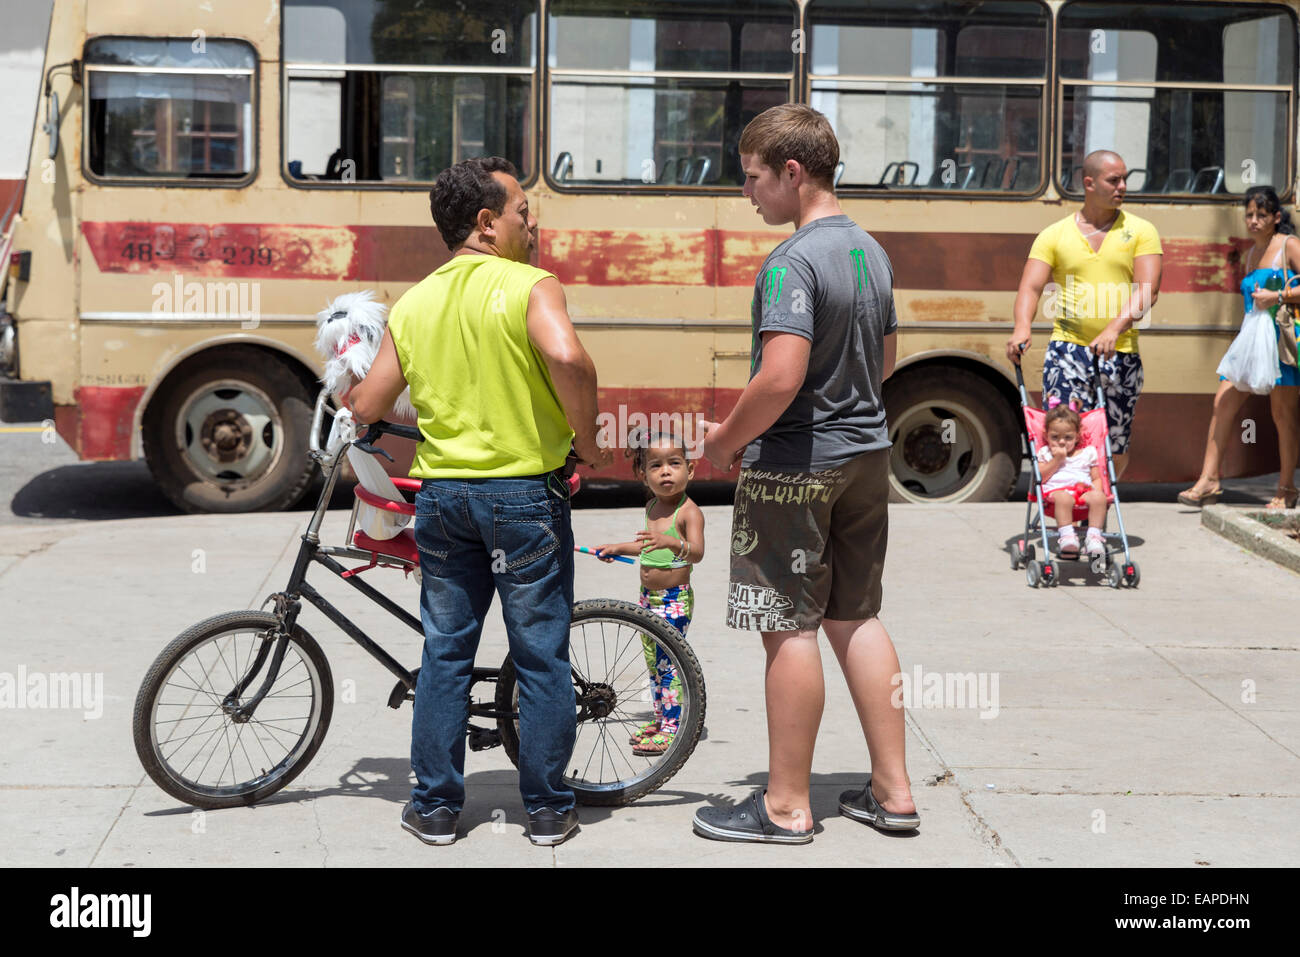 MATANZAS, CUBA - MAY 10, 2014: People on a busy downtown street in the city of Matanzas, Cuba Stock Photo